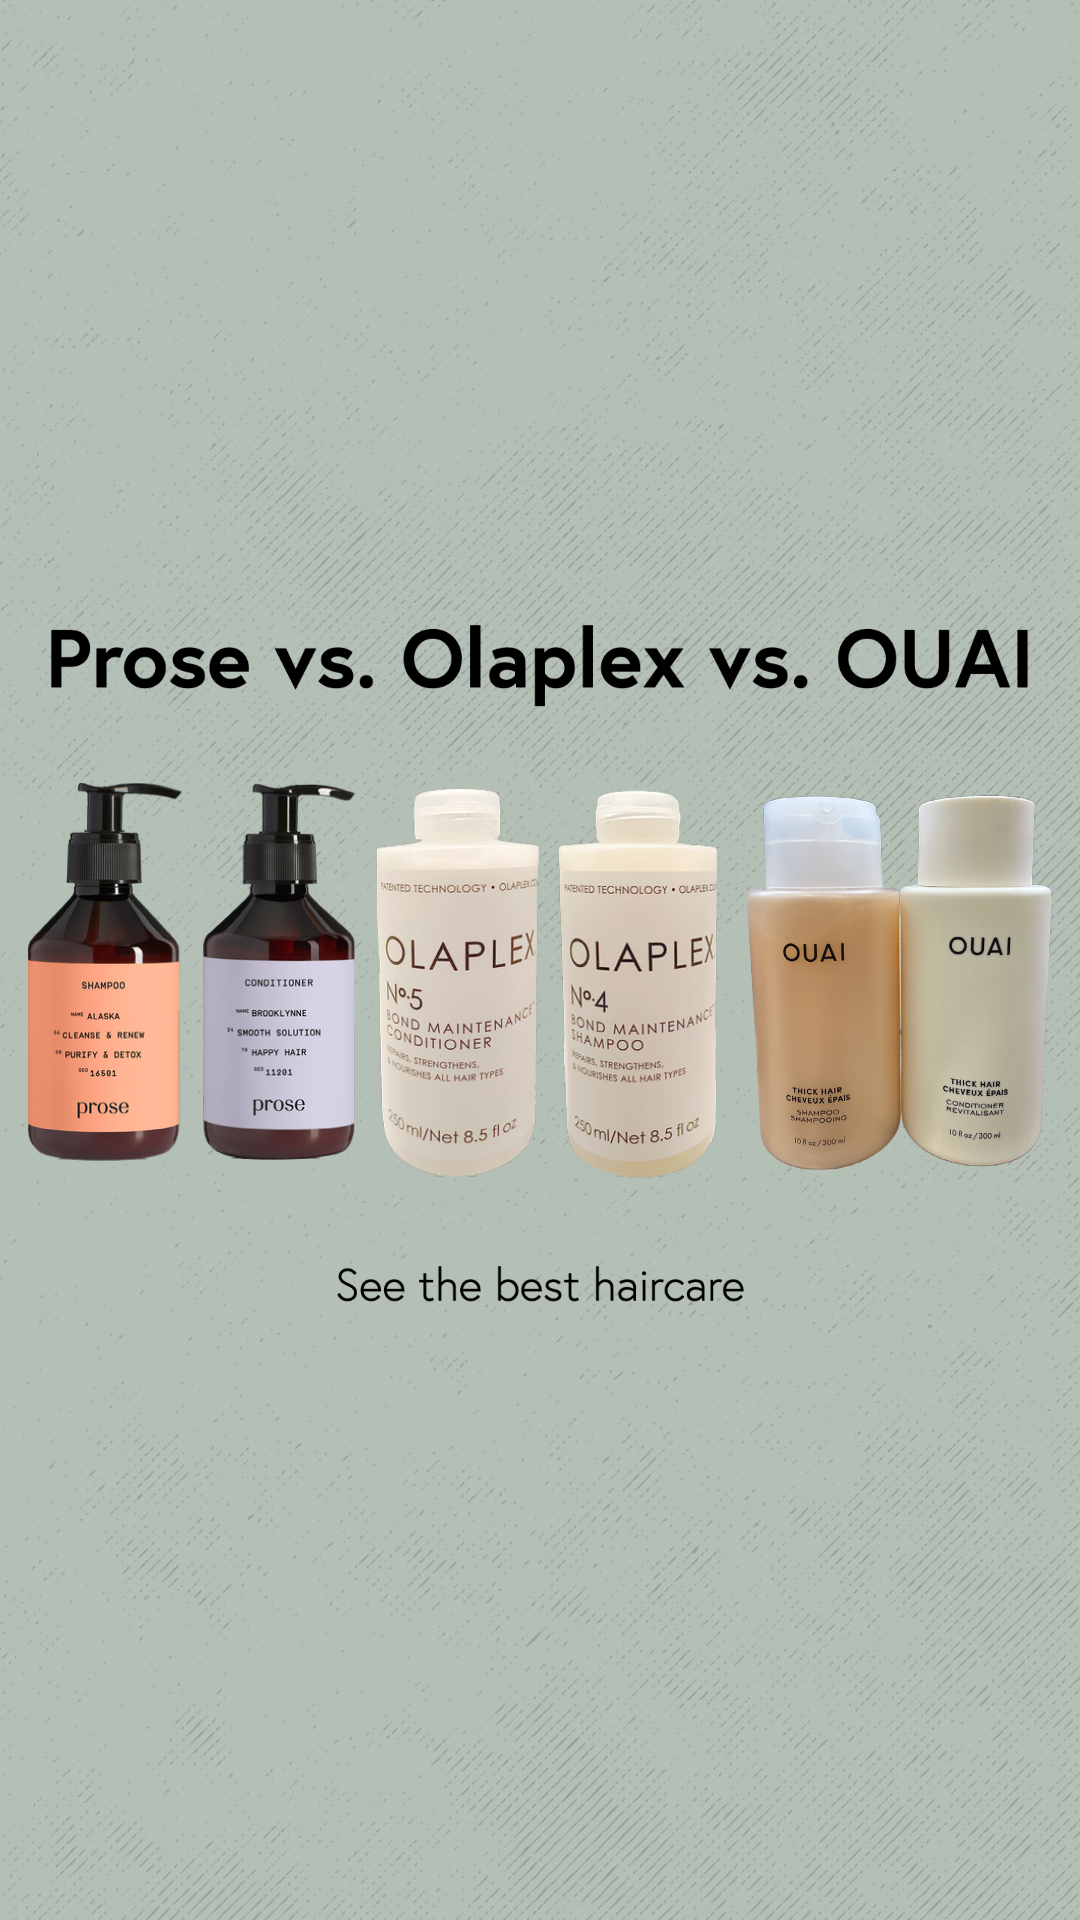 Prose vs. Olaplex vs. OUAI: Which is the Ultimate Winner for Curly Hair?